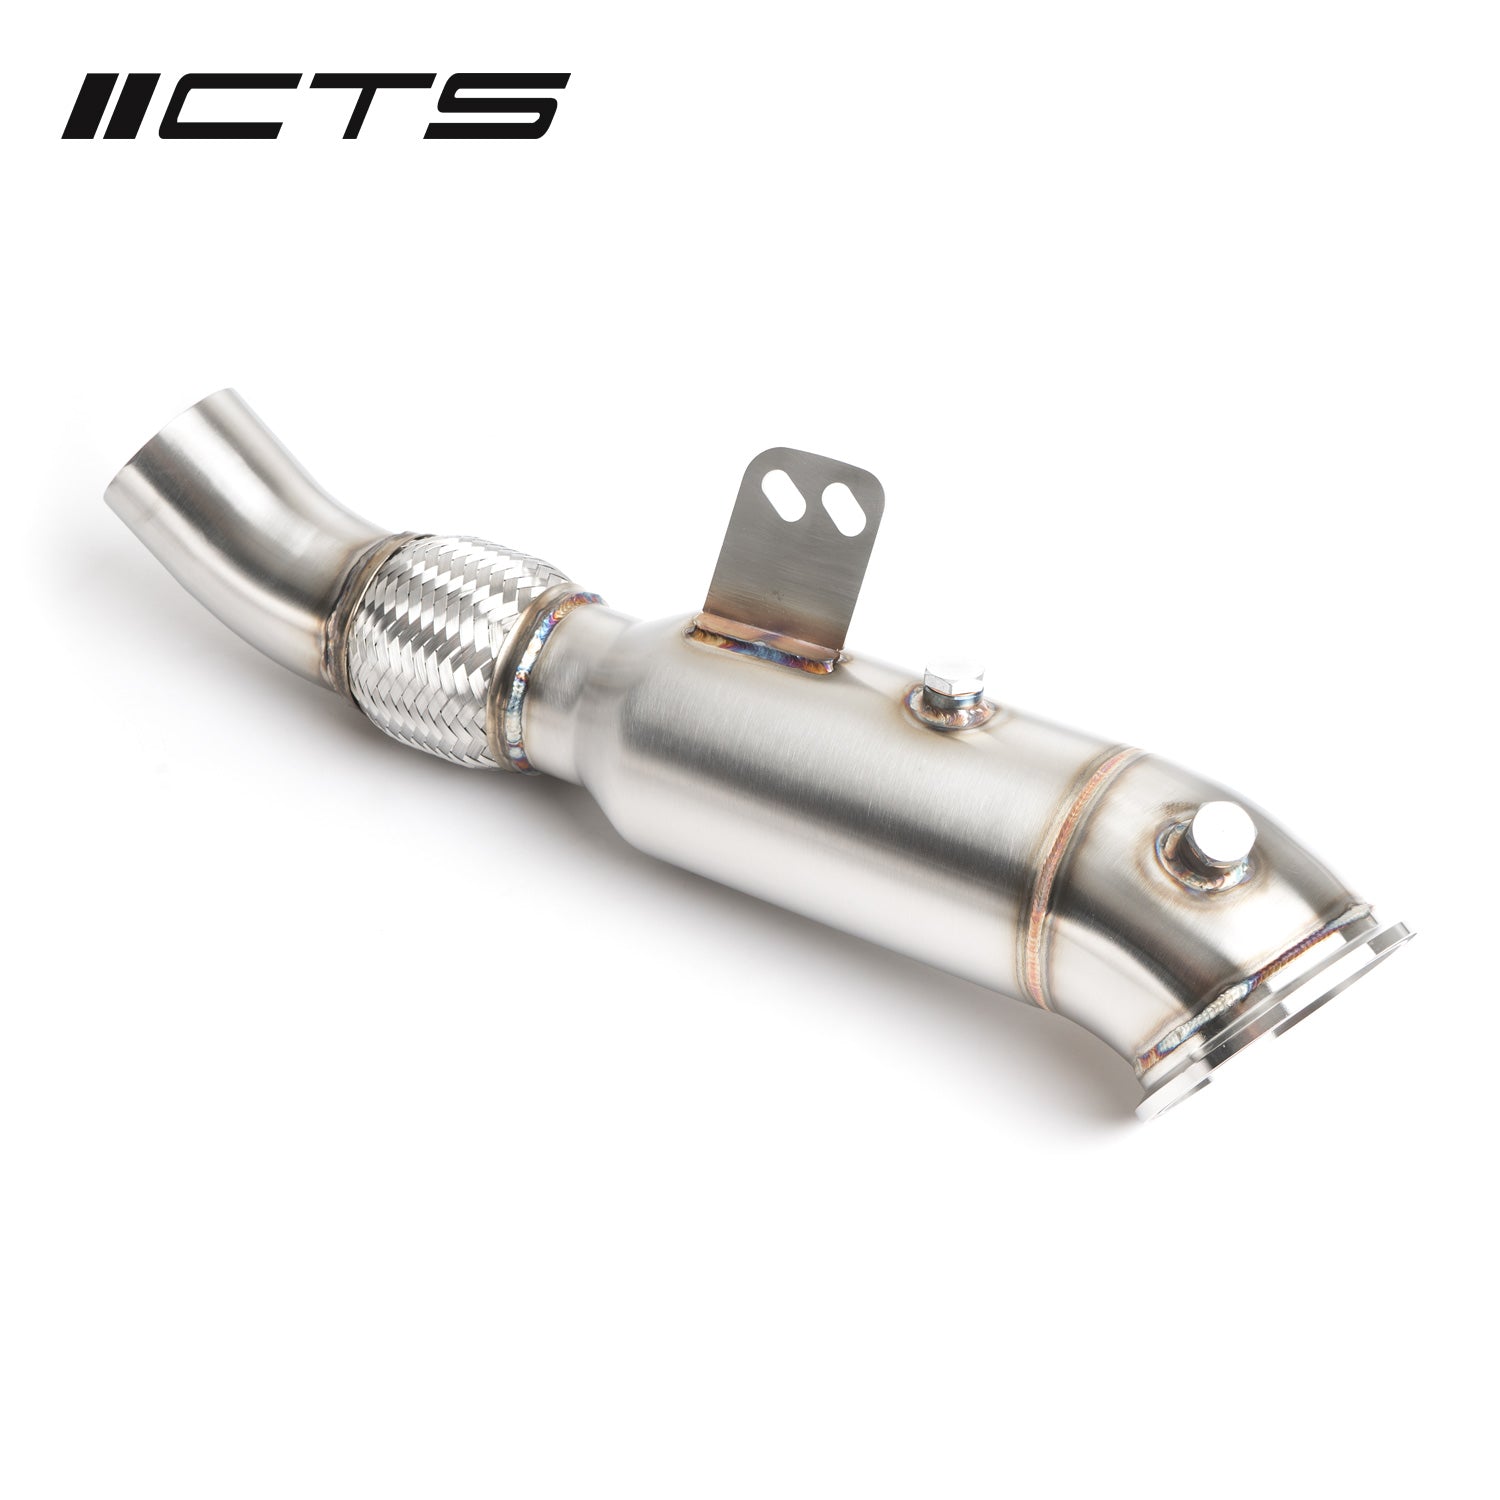 CTS TURBO 4.5″ CATLESS DOWNPIPE FOR MK5 A90 2020 TOYOTA SUPRA - 0